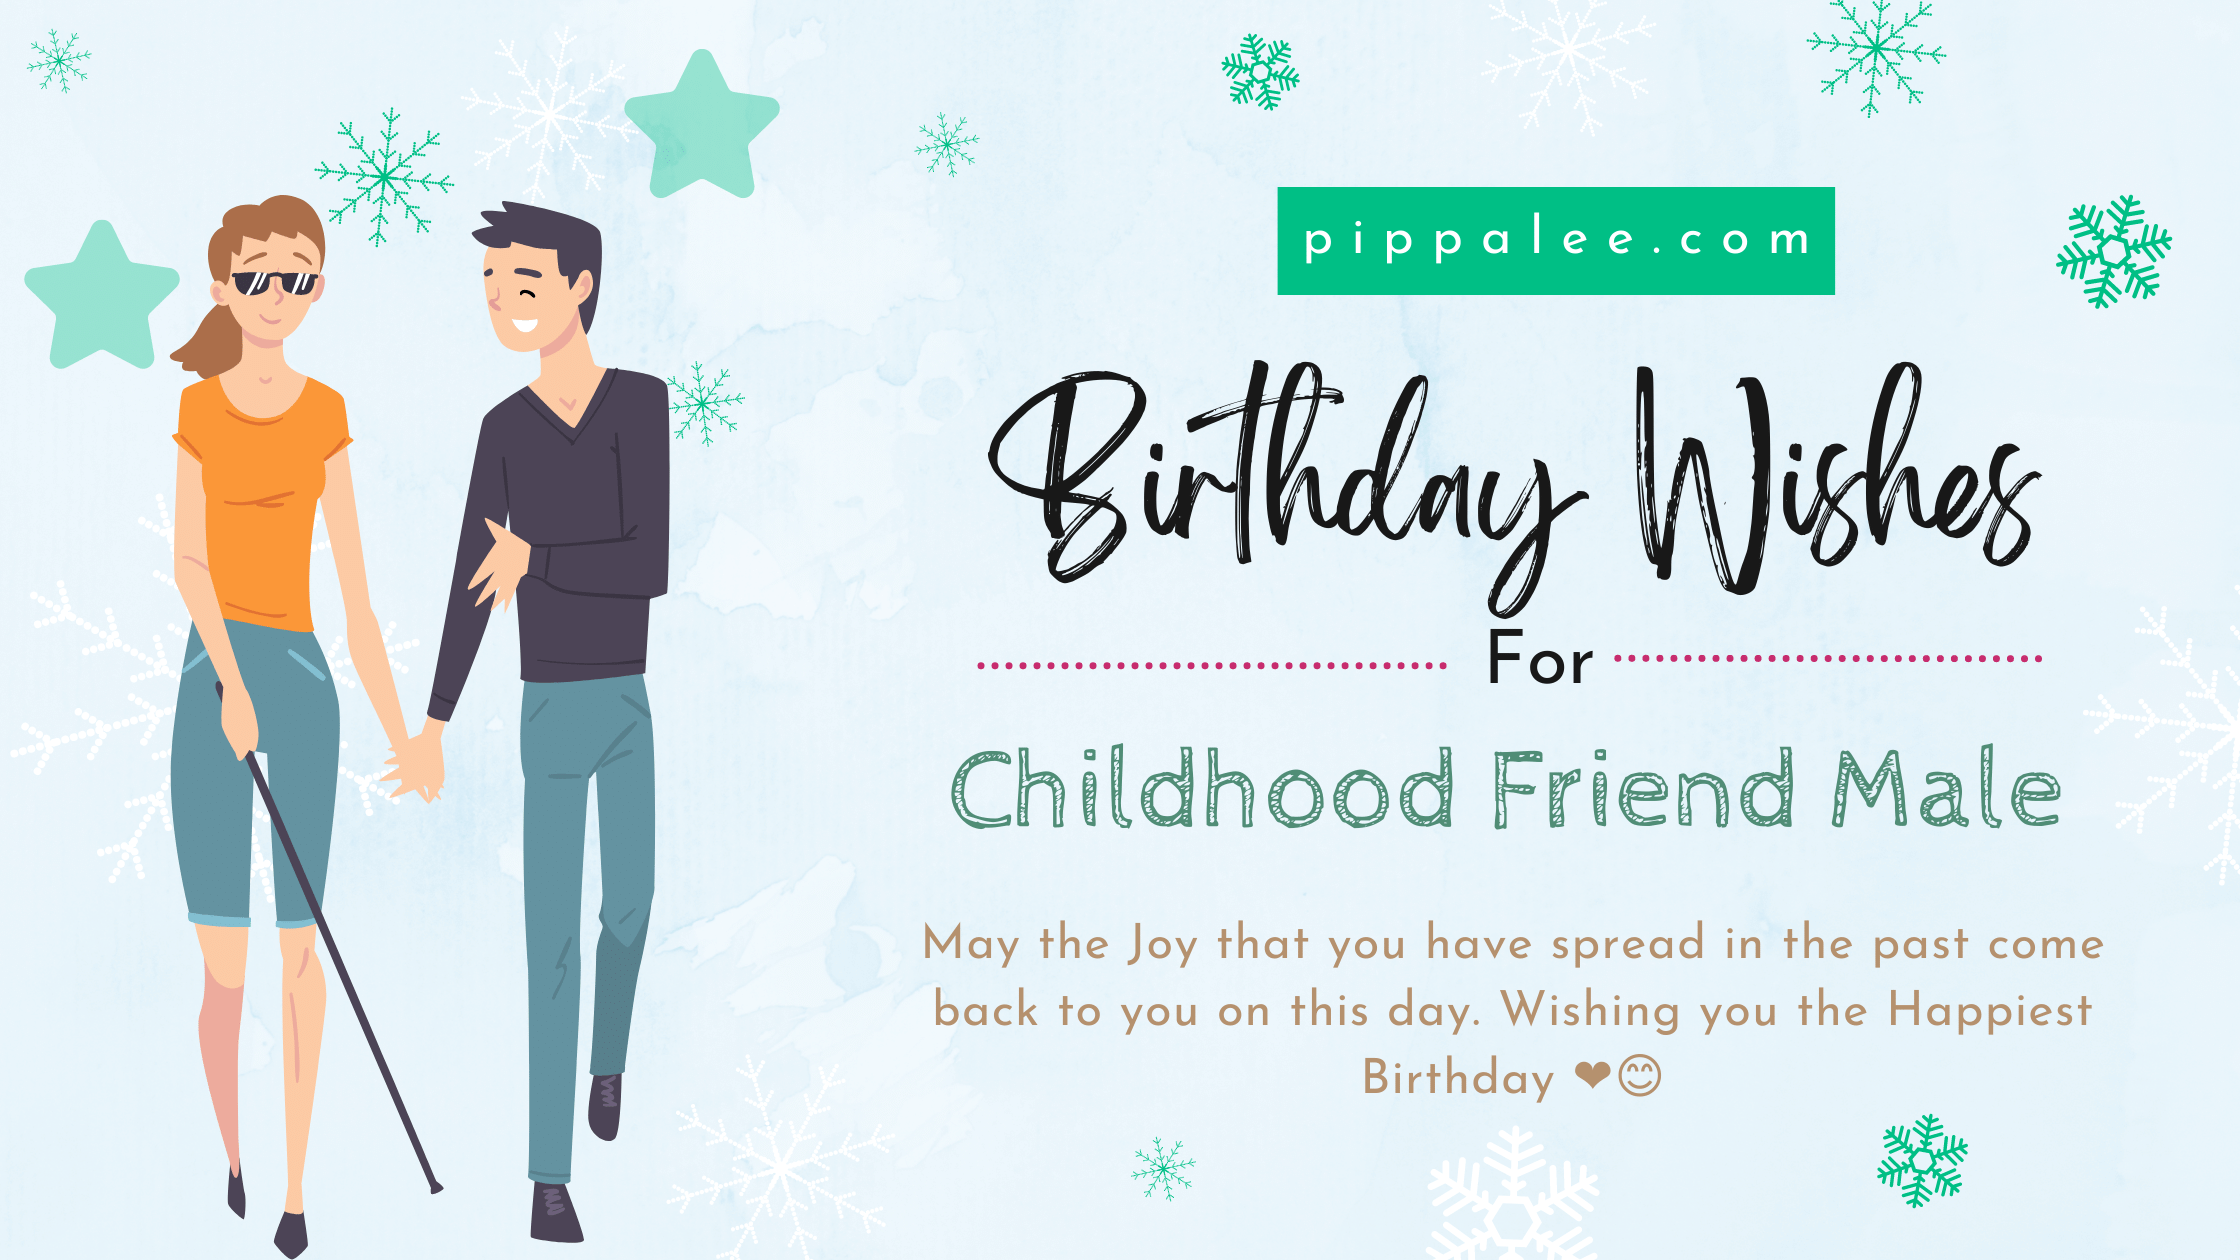 Birthday Wishes for Childhood Friend Male - Wishes & Messages